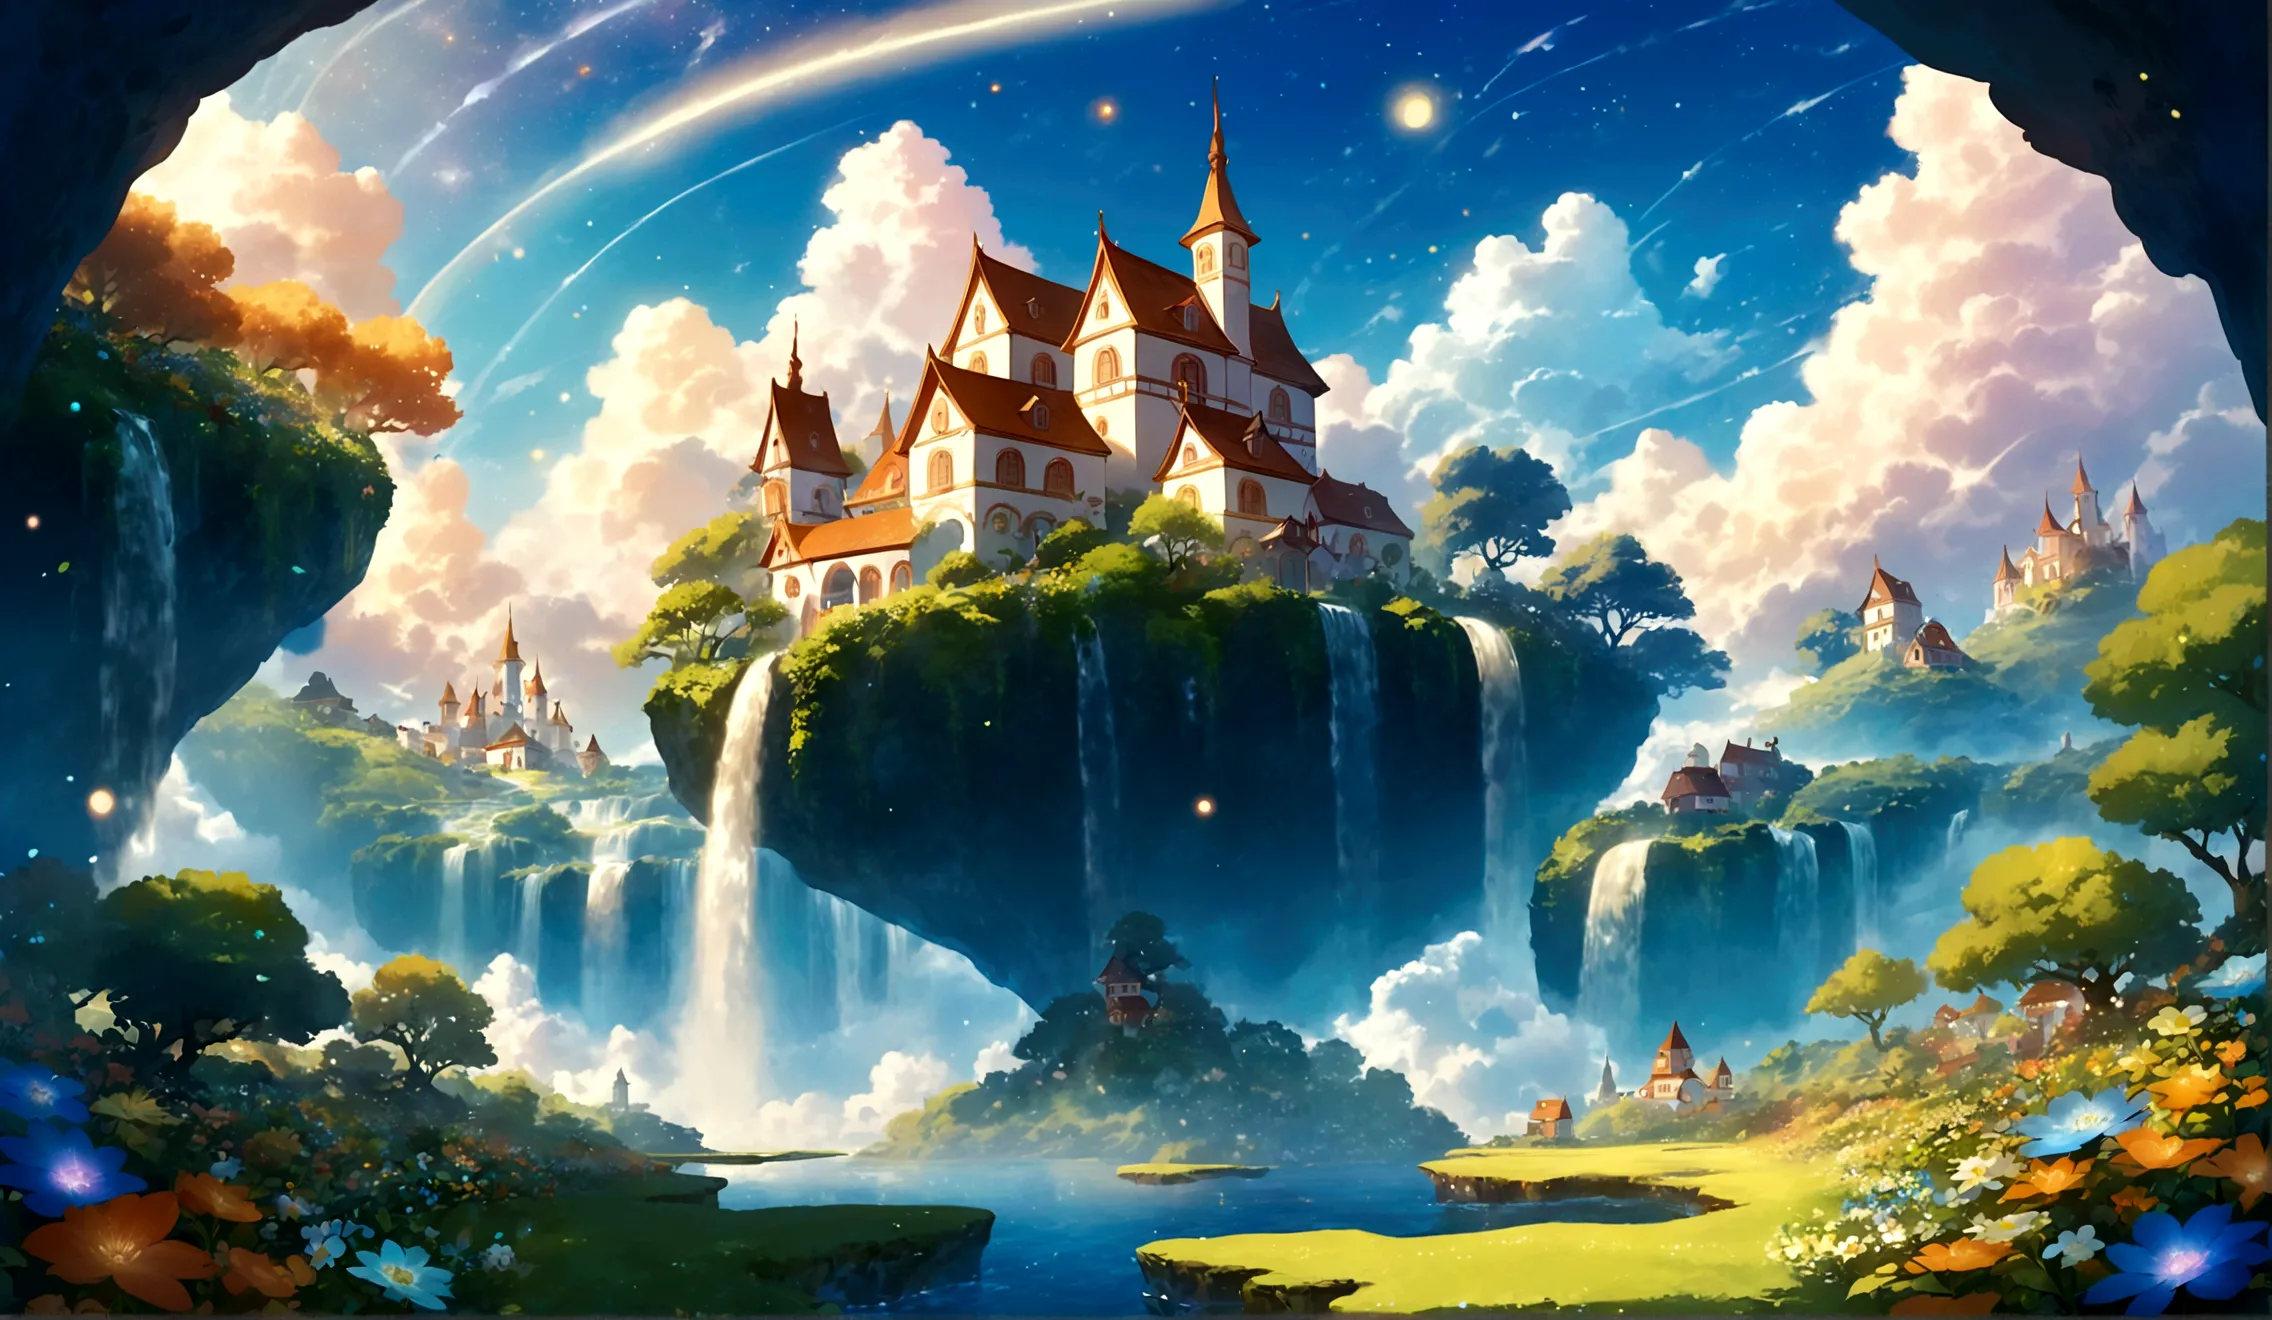 fantasy scenery, whimsical floating islands in the sky, with lush gardens, and fantastical architecture that defies gravity, flo...